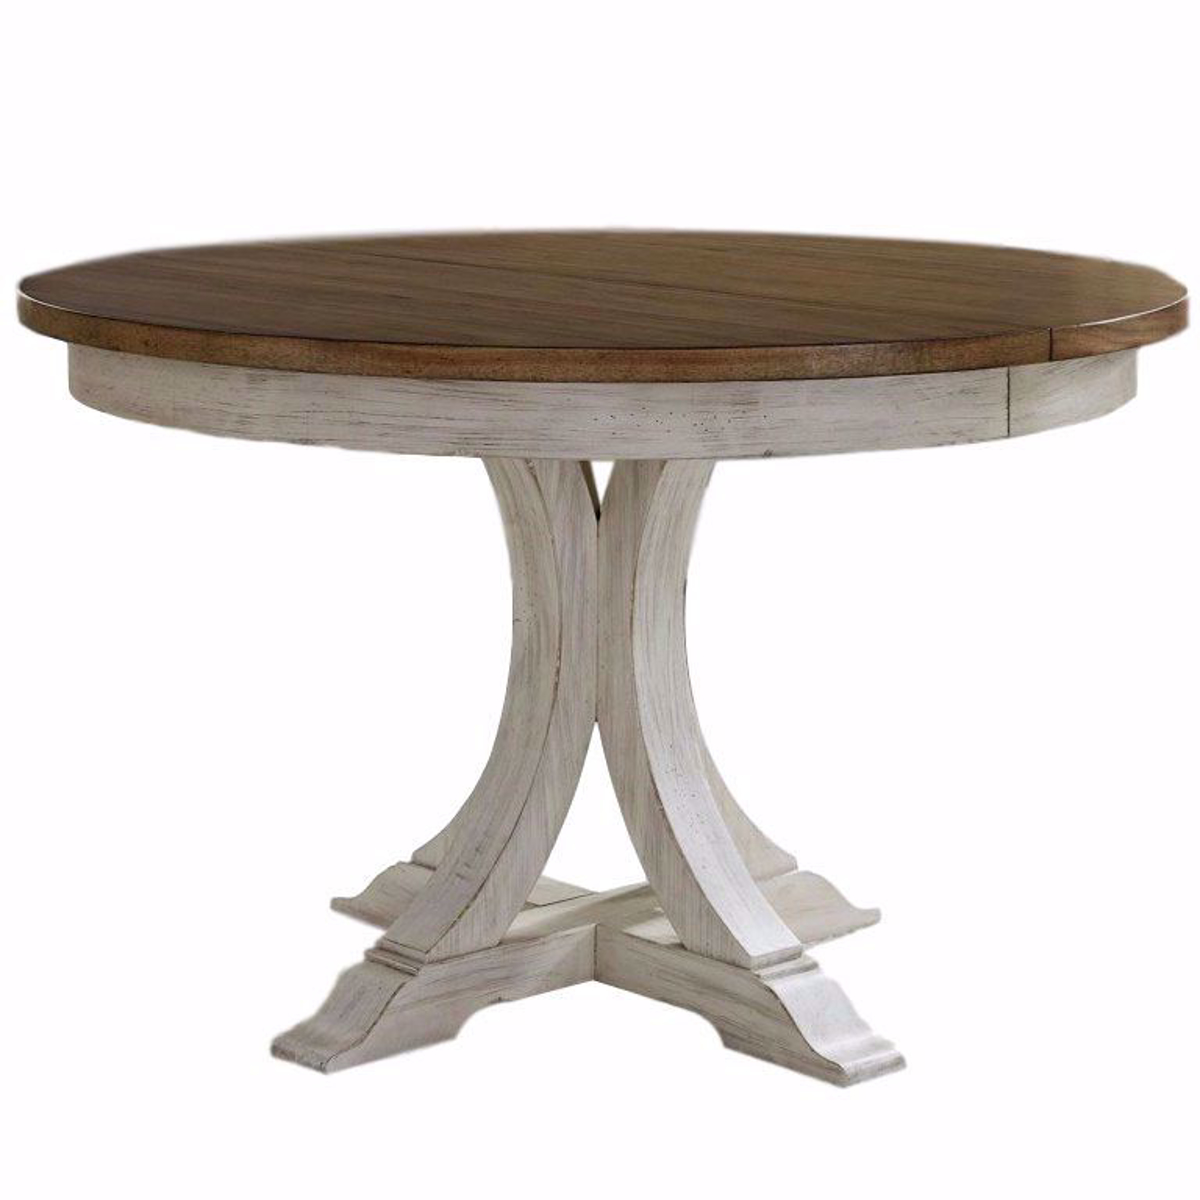 Picture of Roanoak Pedestal Dining Table